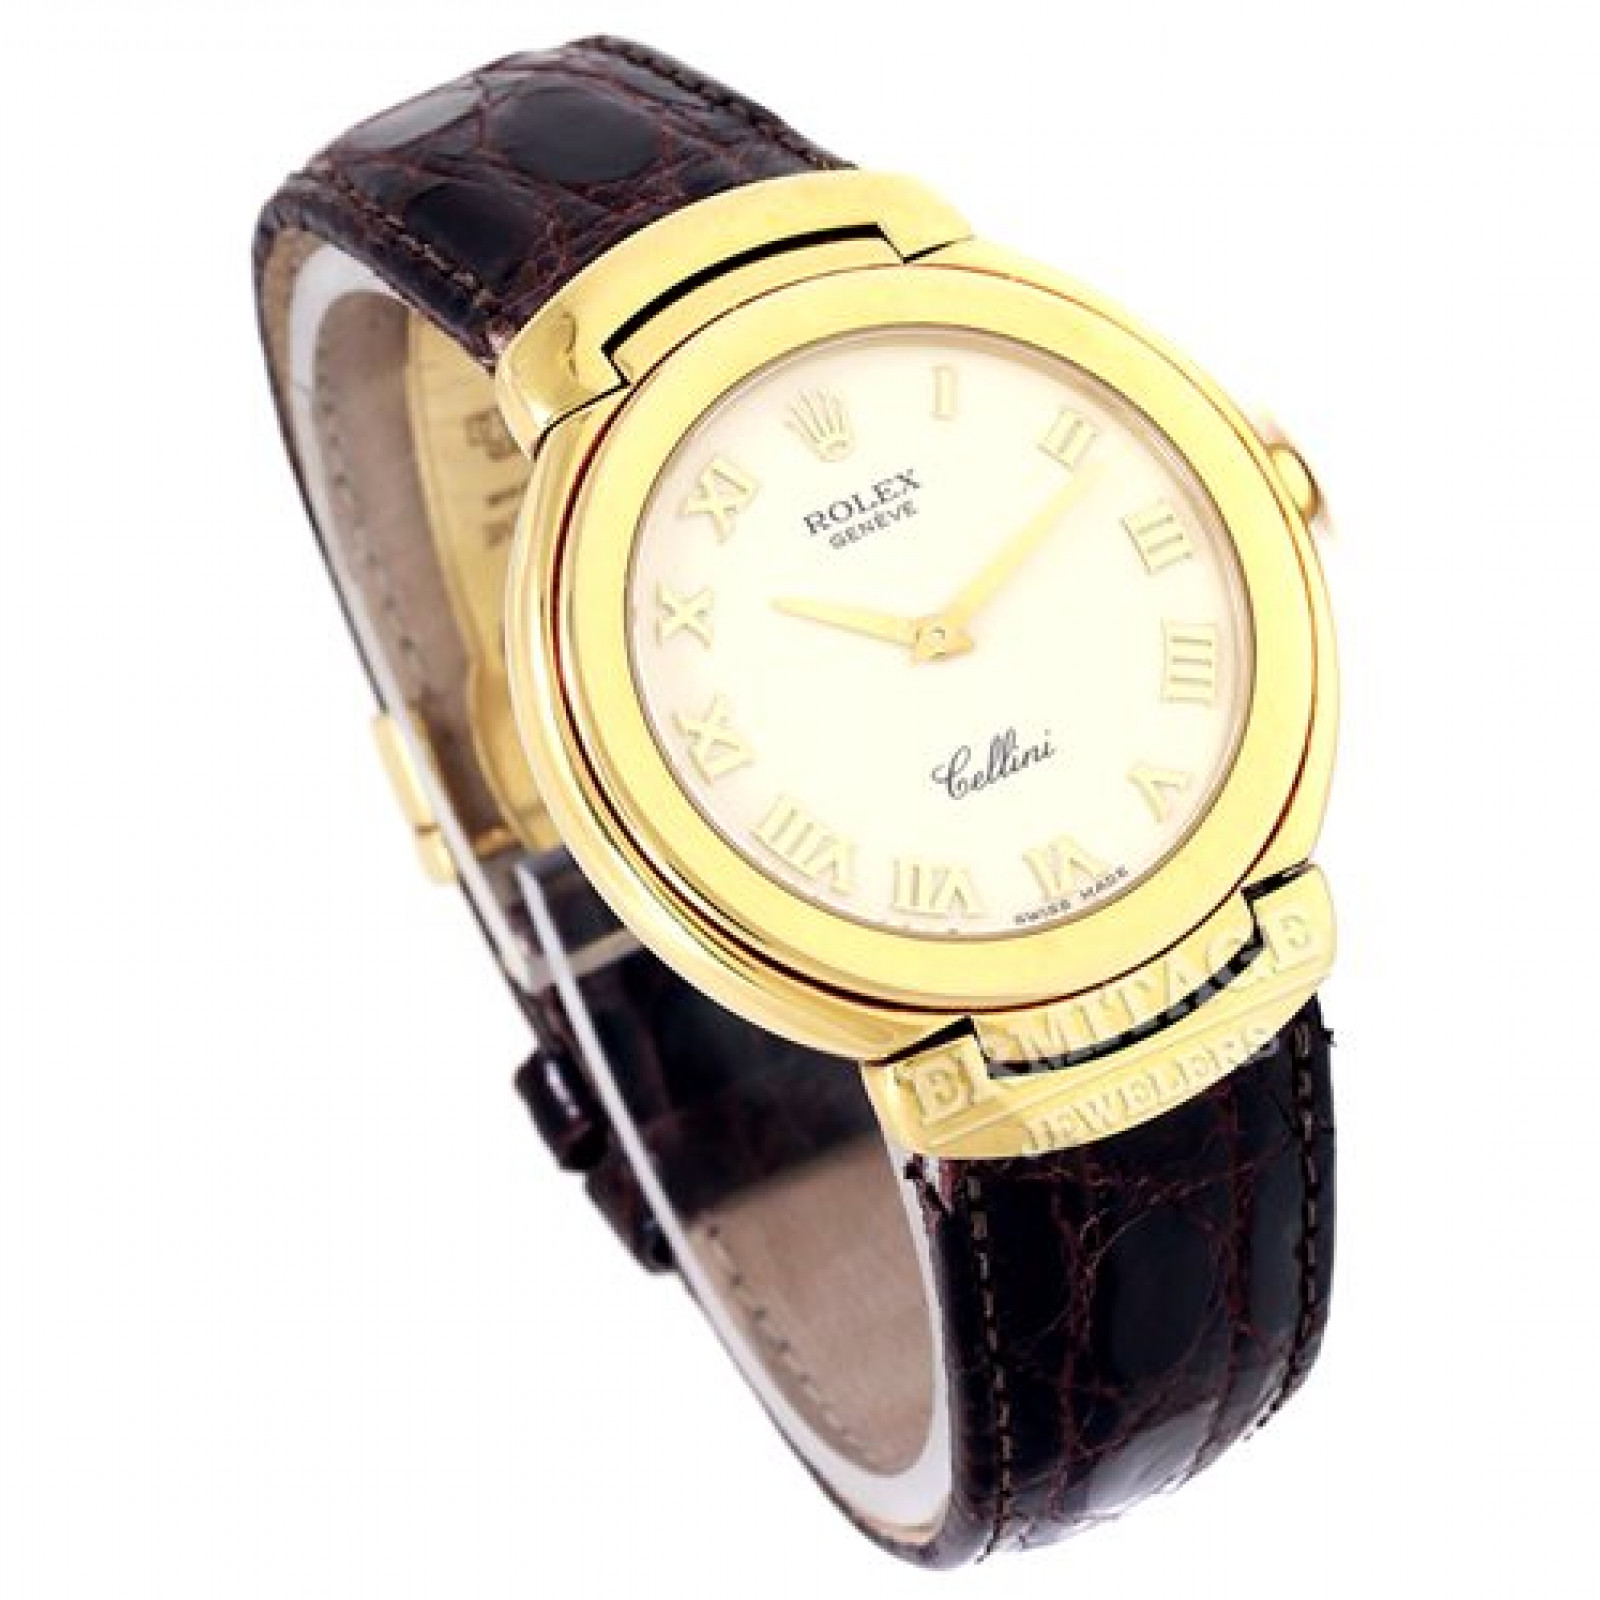 Pre-Owned Rolex Cellini 6623 Gold Year 1994